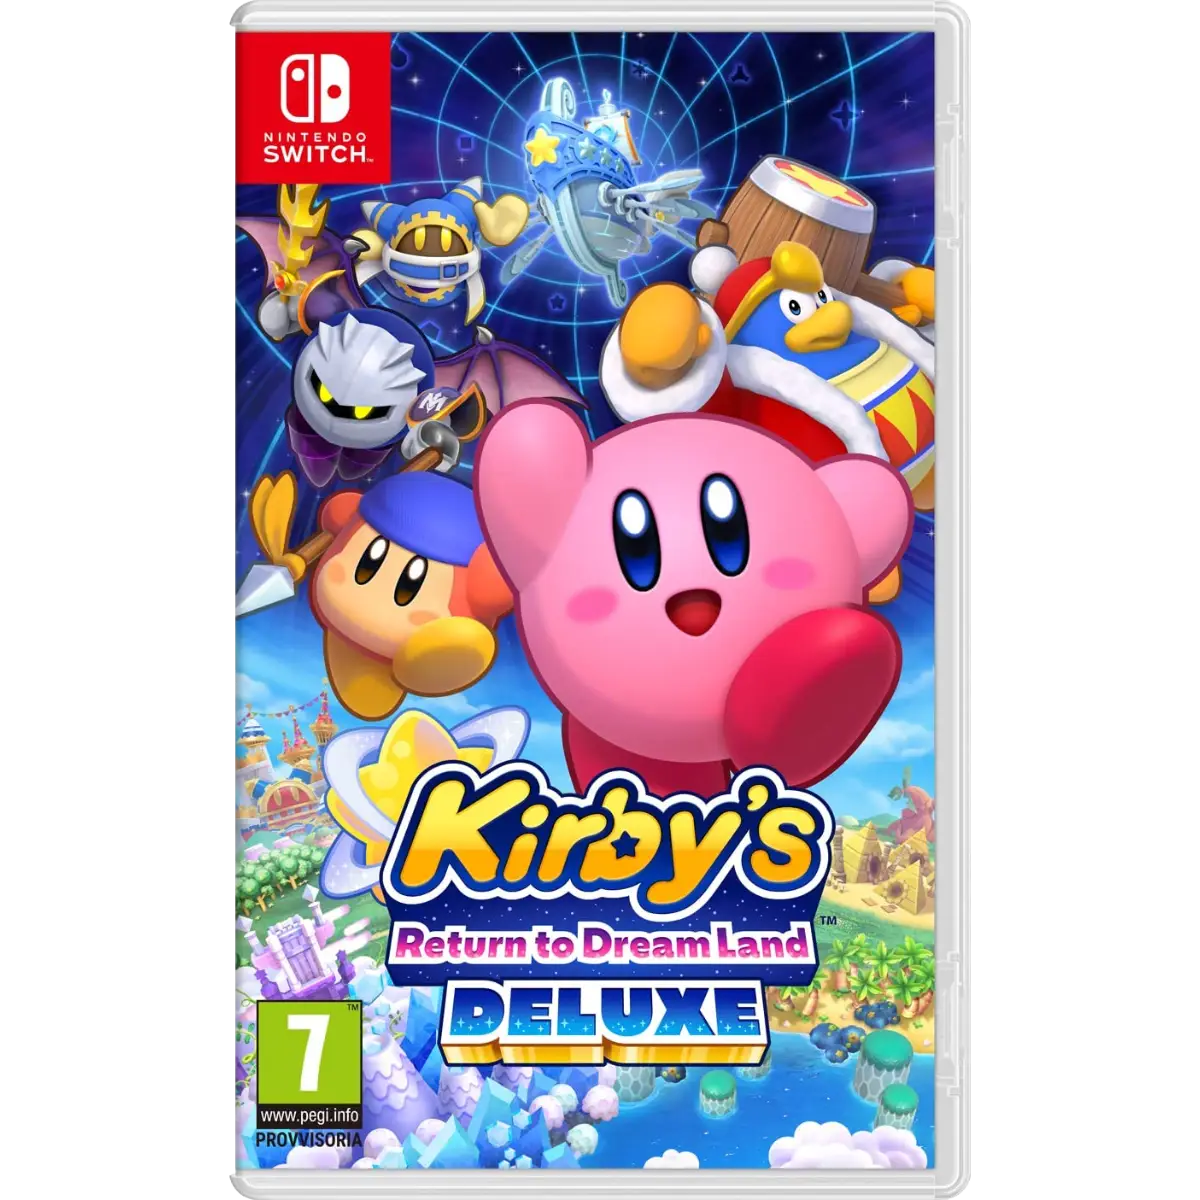 Kirby Returns to Dream Land Deluxe